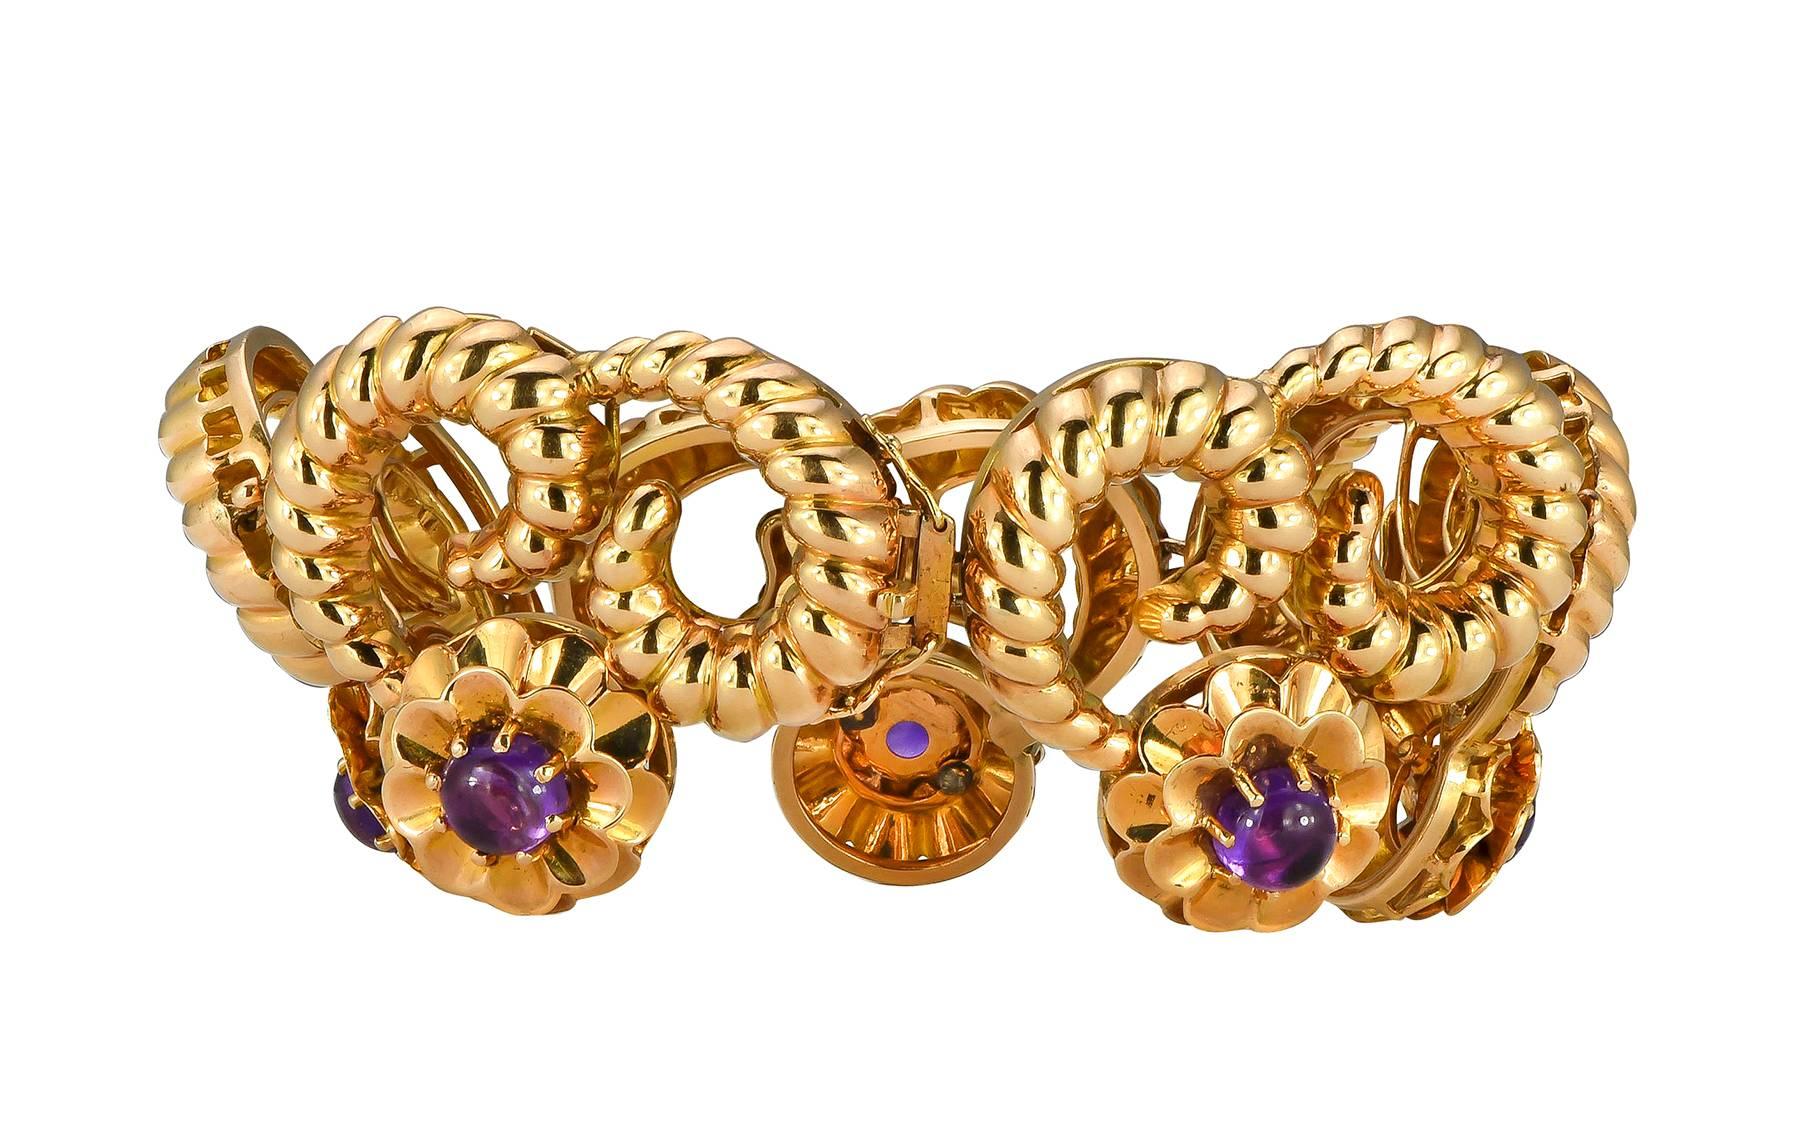 8.90cts cabochon amethyst 18k yellow gold scroll bracelet.  The amethyst are prong set in a floral design, suspended form the linked scrolls.

Length:  7.75 inches
Hallmark:  750